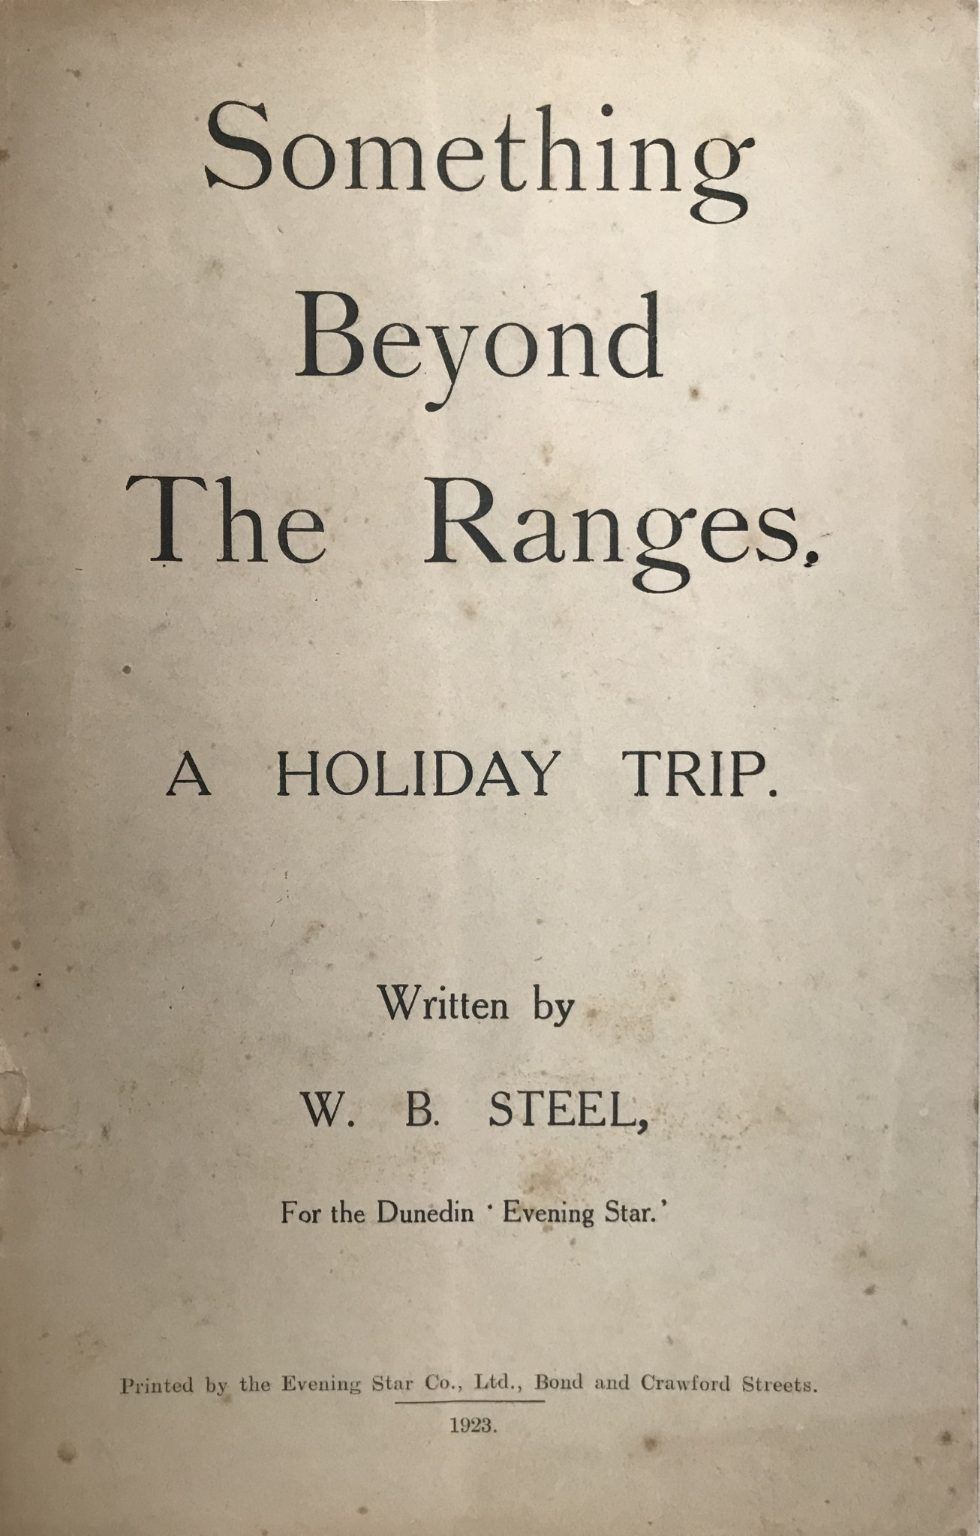 SOMETHING BEYOND THE RANGES: A Holiday Trip